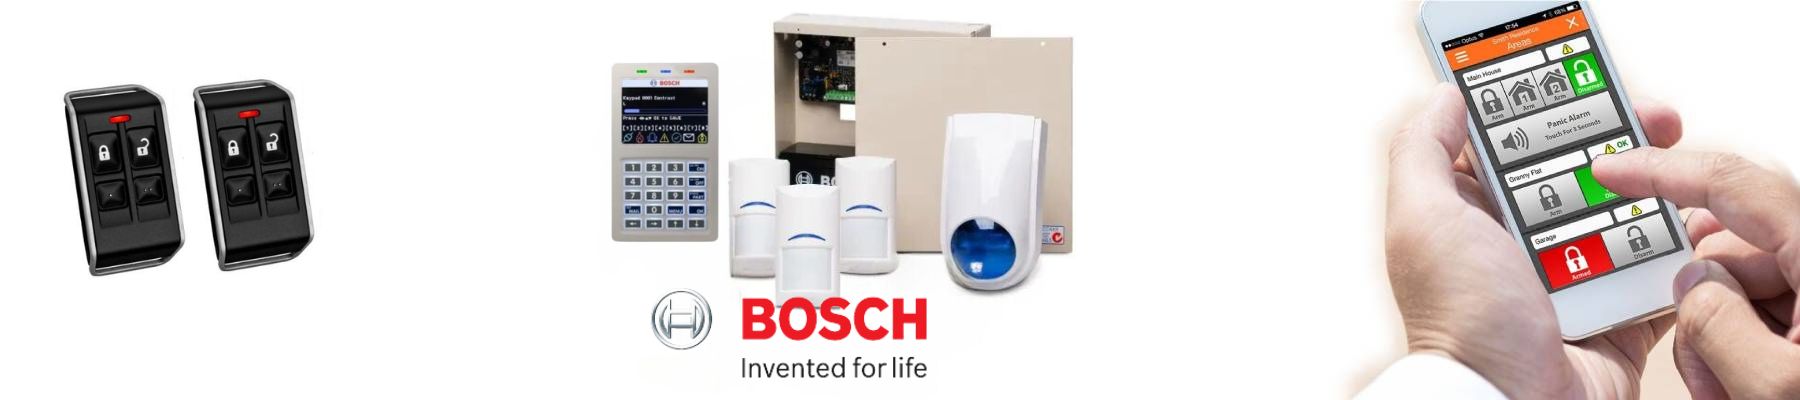 Bosch Solution 6000 alarm system review